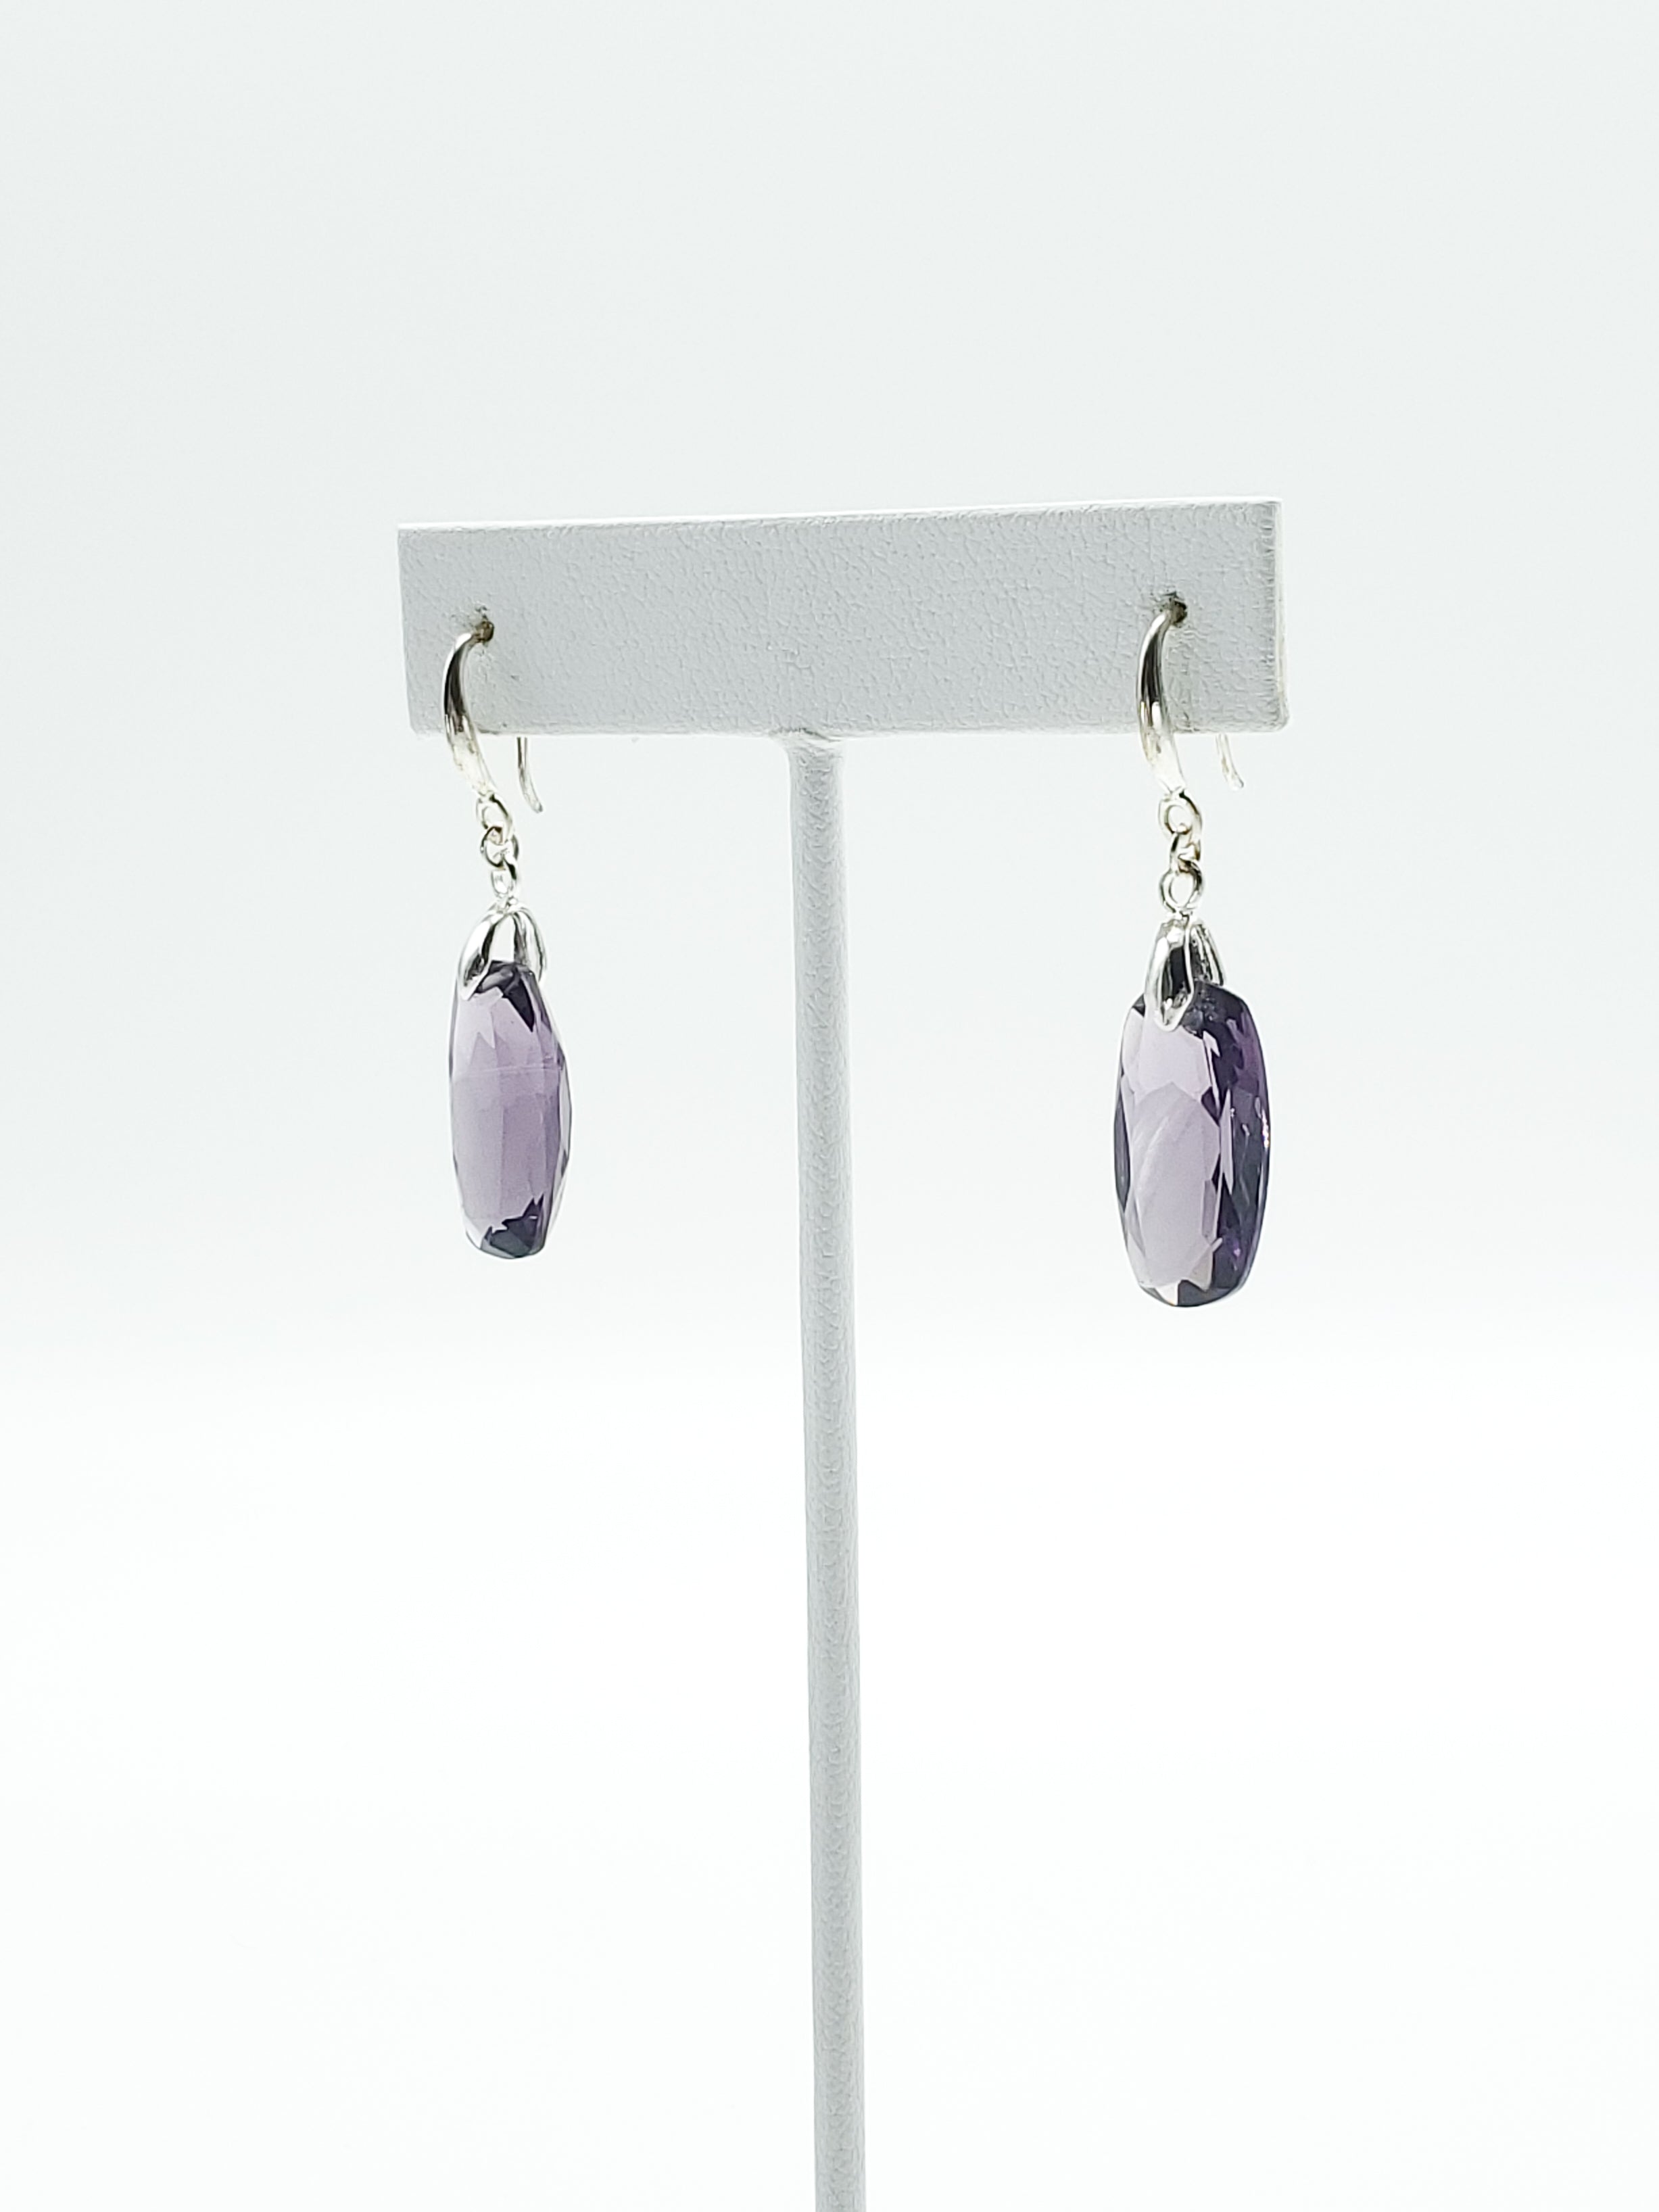 Cushion Cut Hydro Amethyst Earrings on Sterling Silver Bails and Ear Wires - The Caffeinated Raven